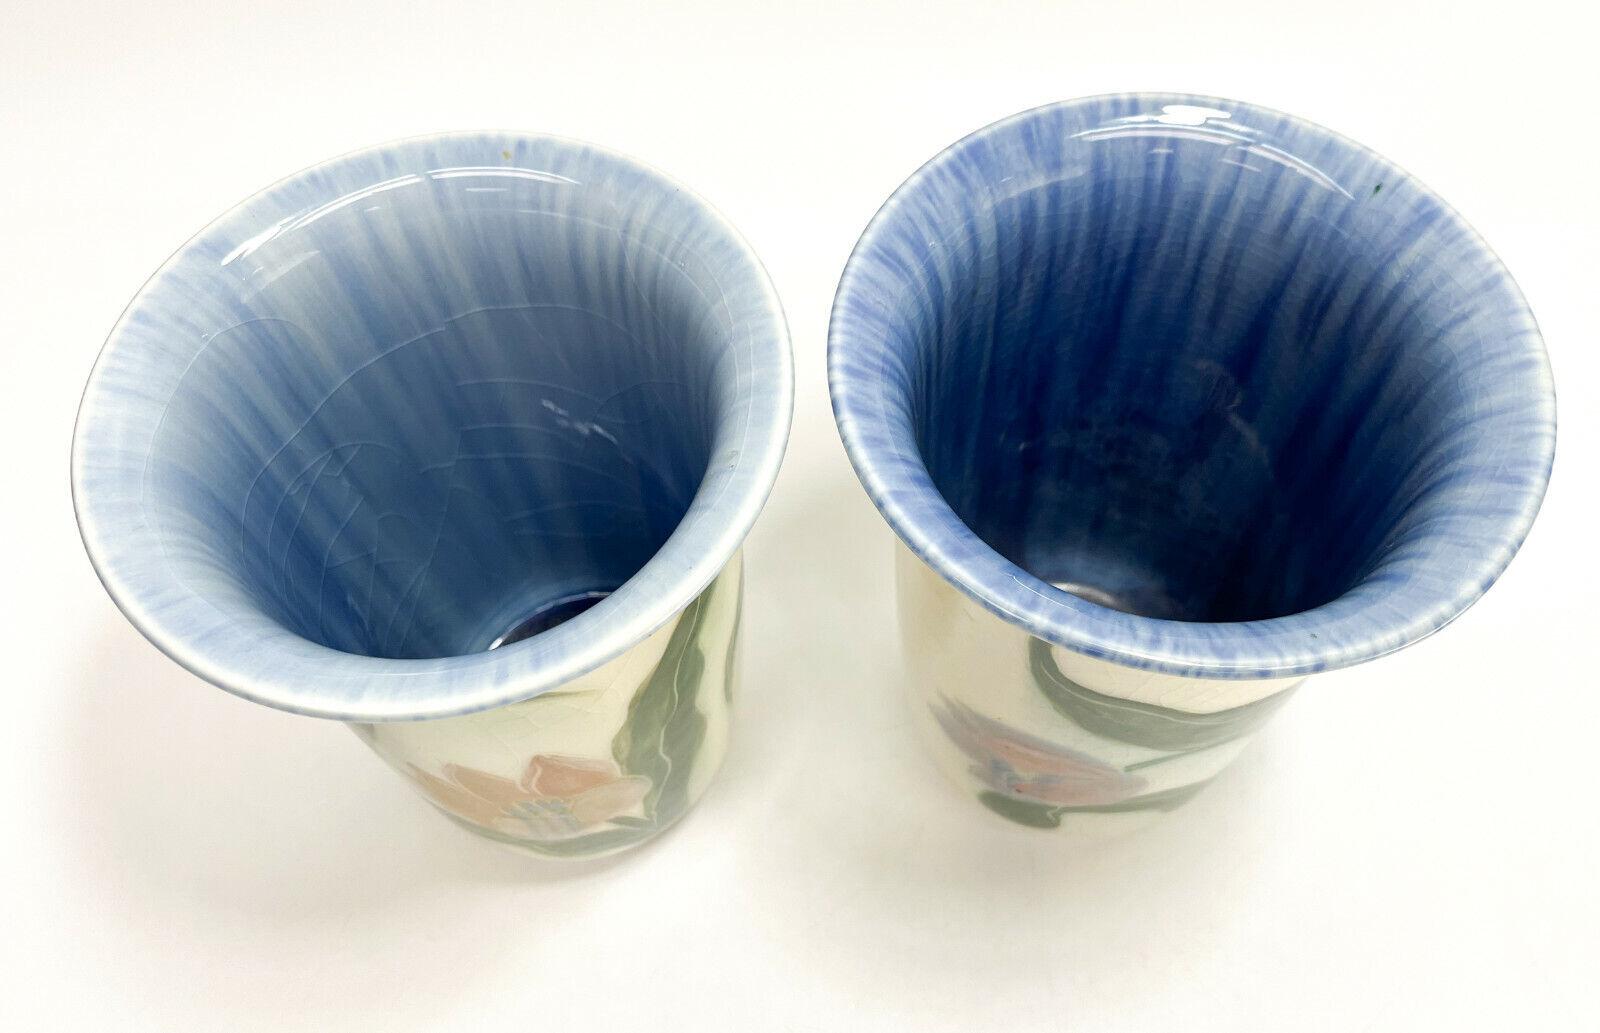 Pair of Rookwood Pottery Vases by E.T. Hurley #6806, Hand Painted Tulips, 1943 For Sale 1